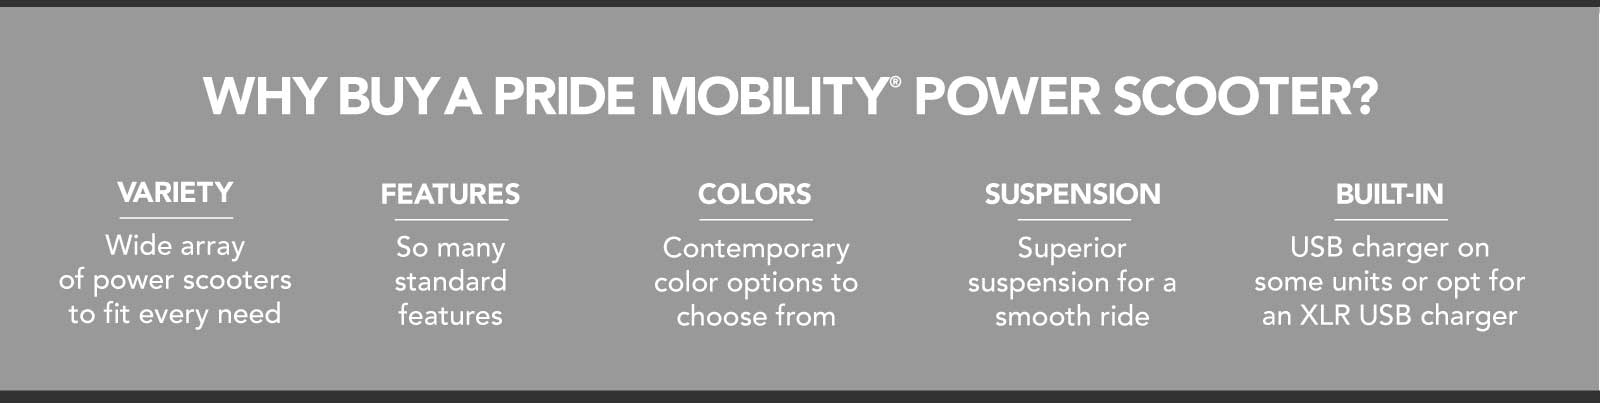 Call 1-800-800-4258 - Pride Mobility Products Corp.